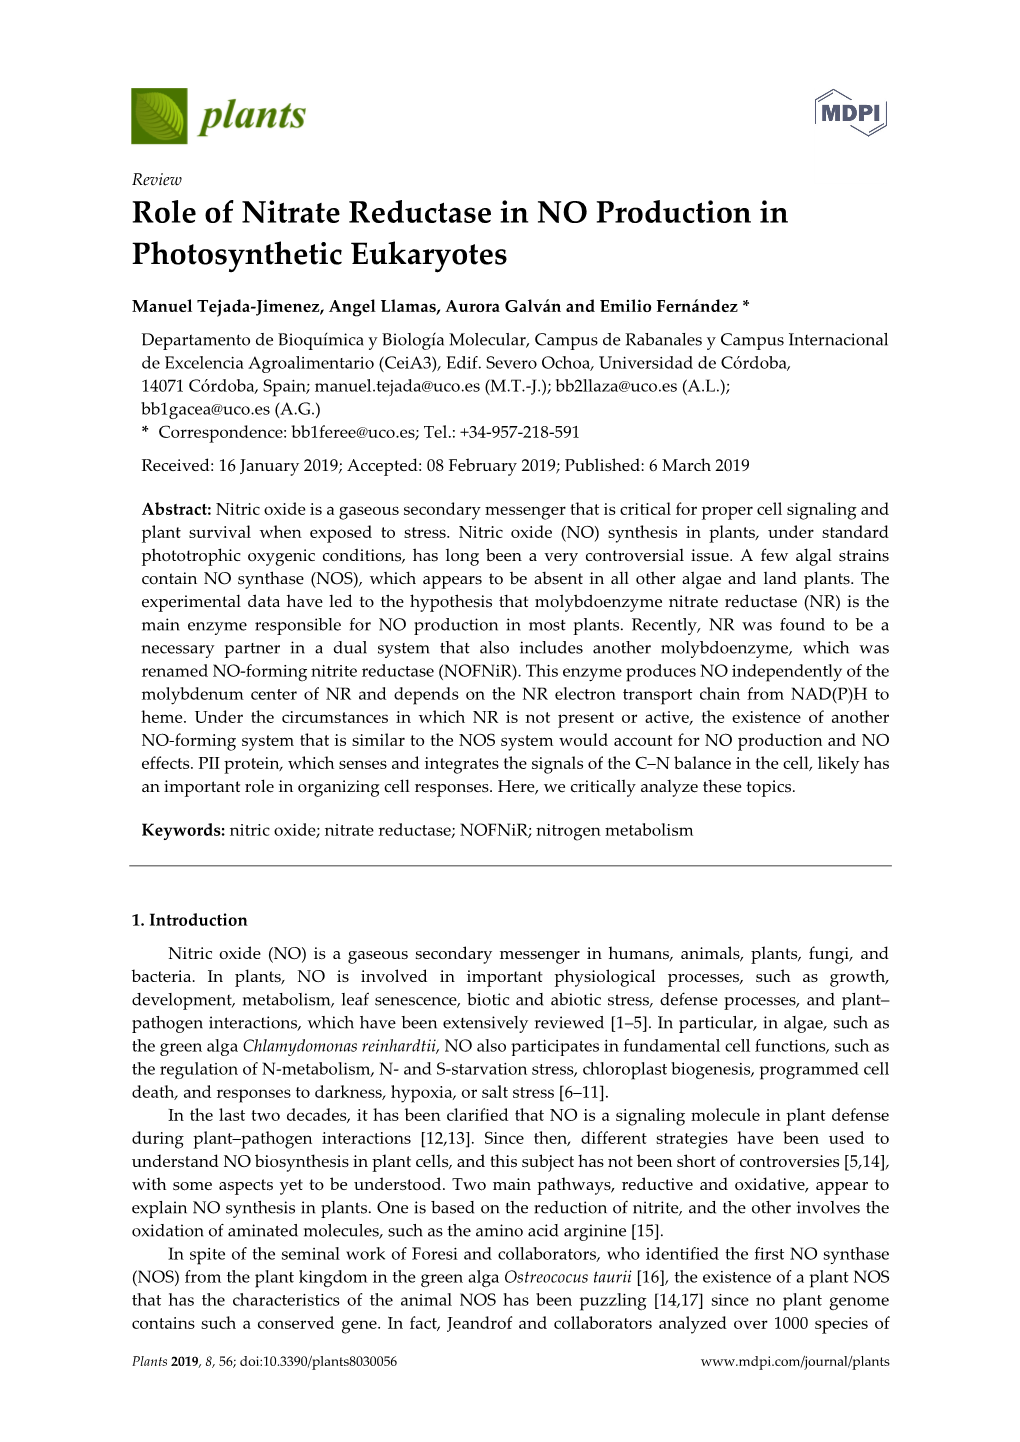 Role of Nitrate Reductase in NO Production in Photosynthetic Eukaryotes